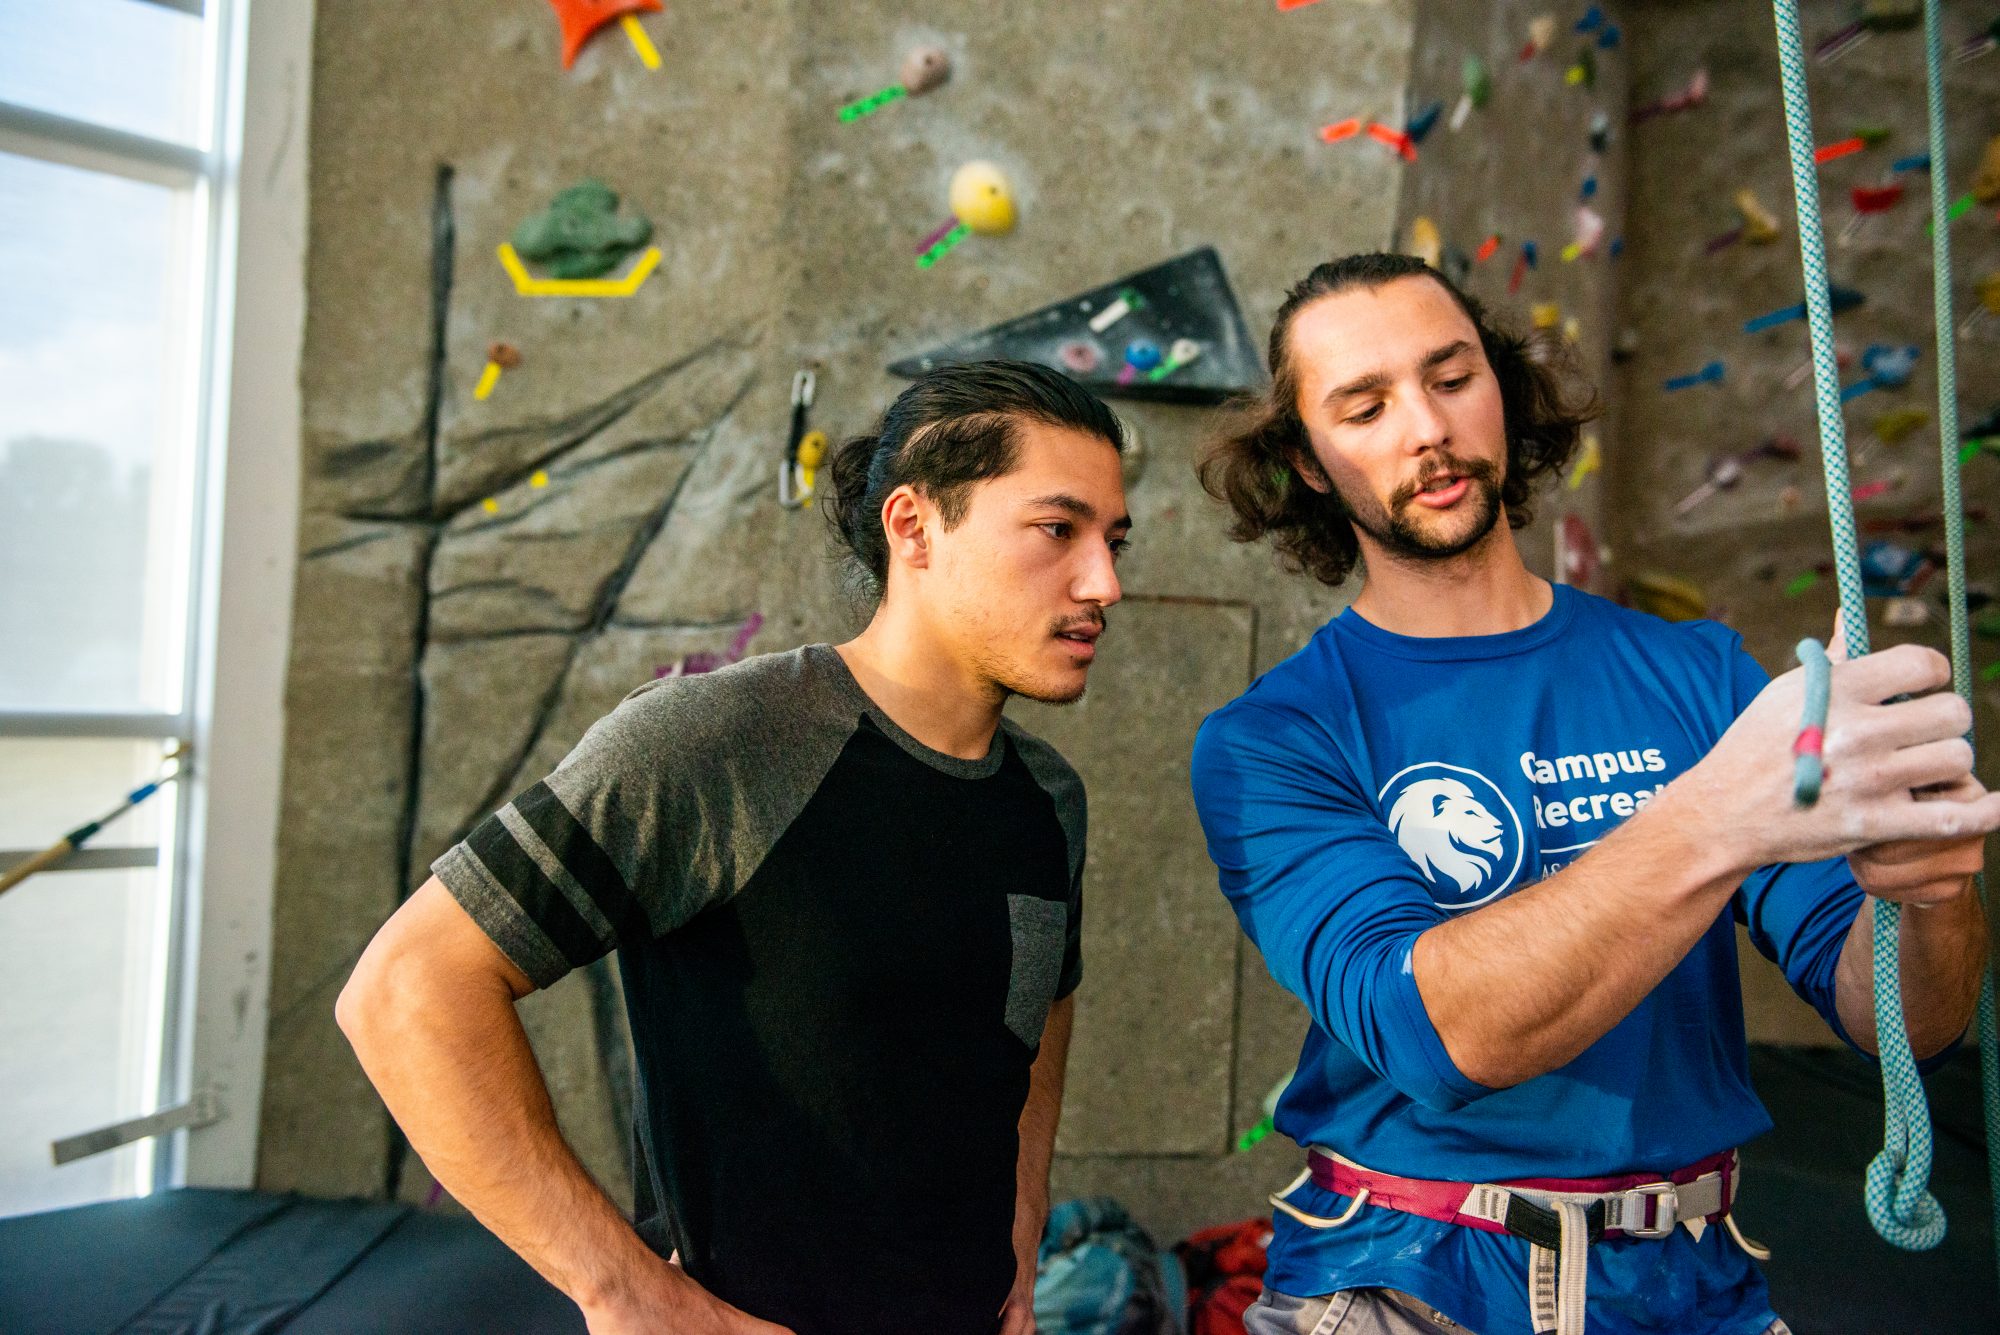 Climbing Staff Member Talking with Climber